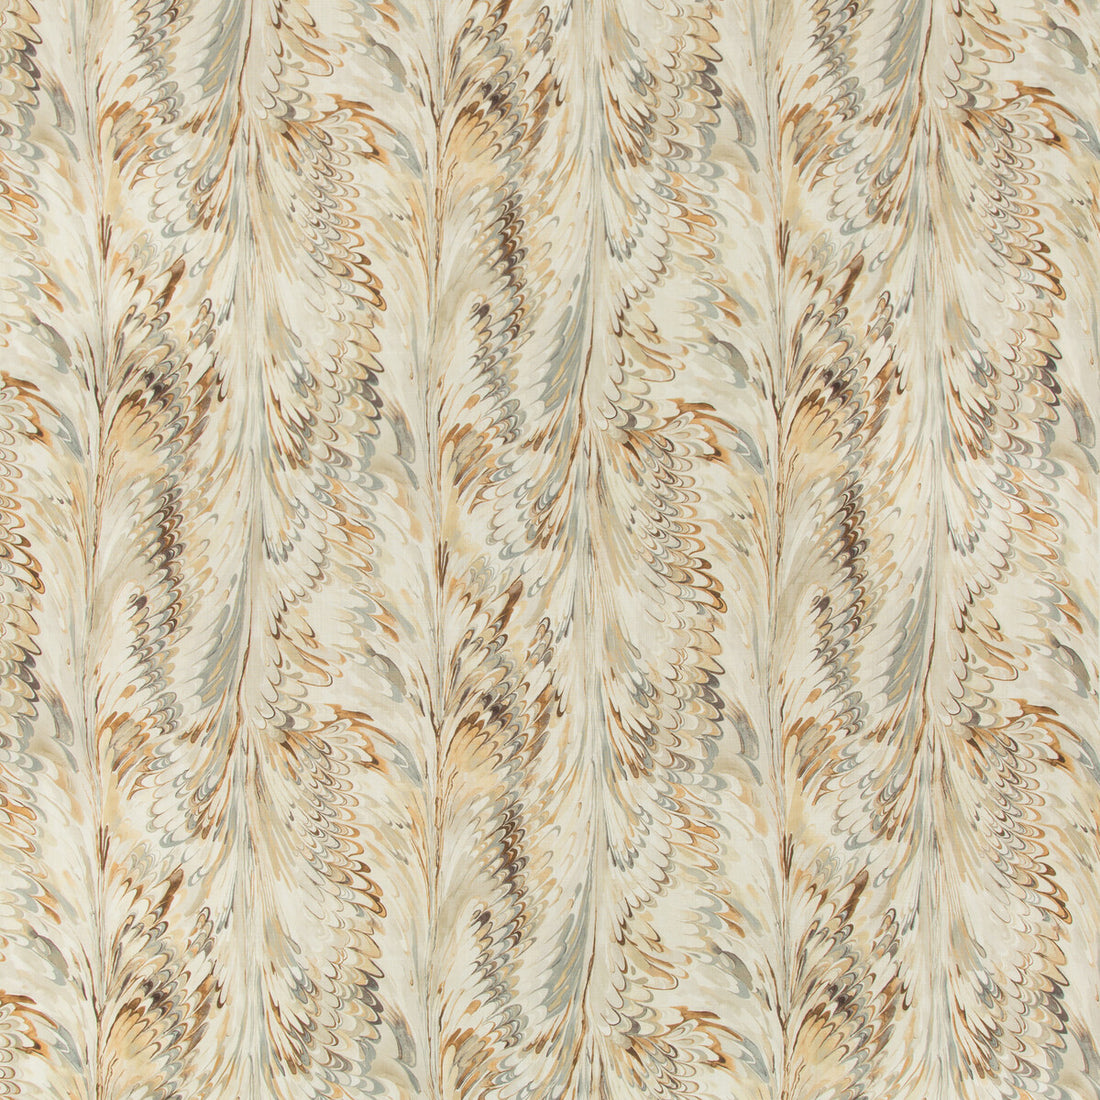 Taplow Print fabric in sand/dove color - pattern 2019114.164.0 - by Lee Jofa in the Manor House collection